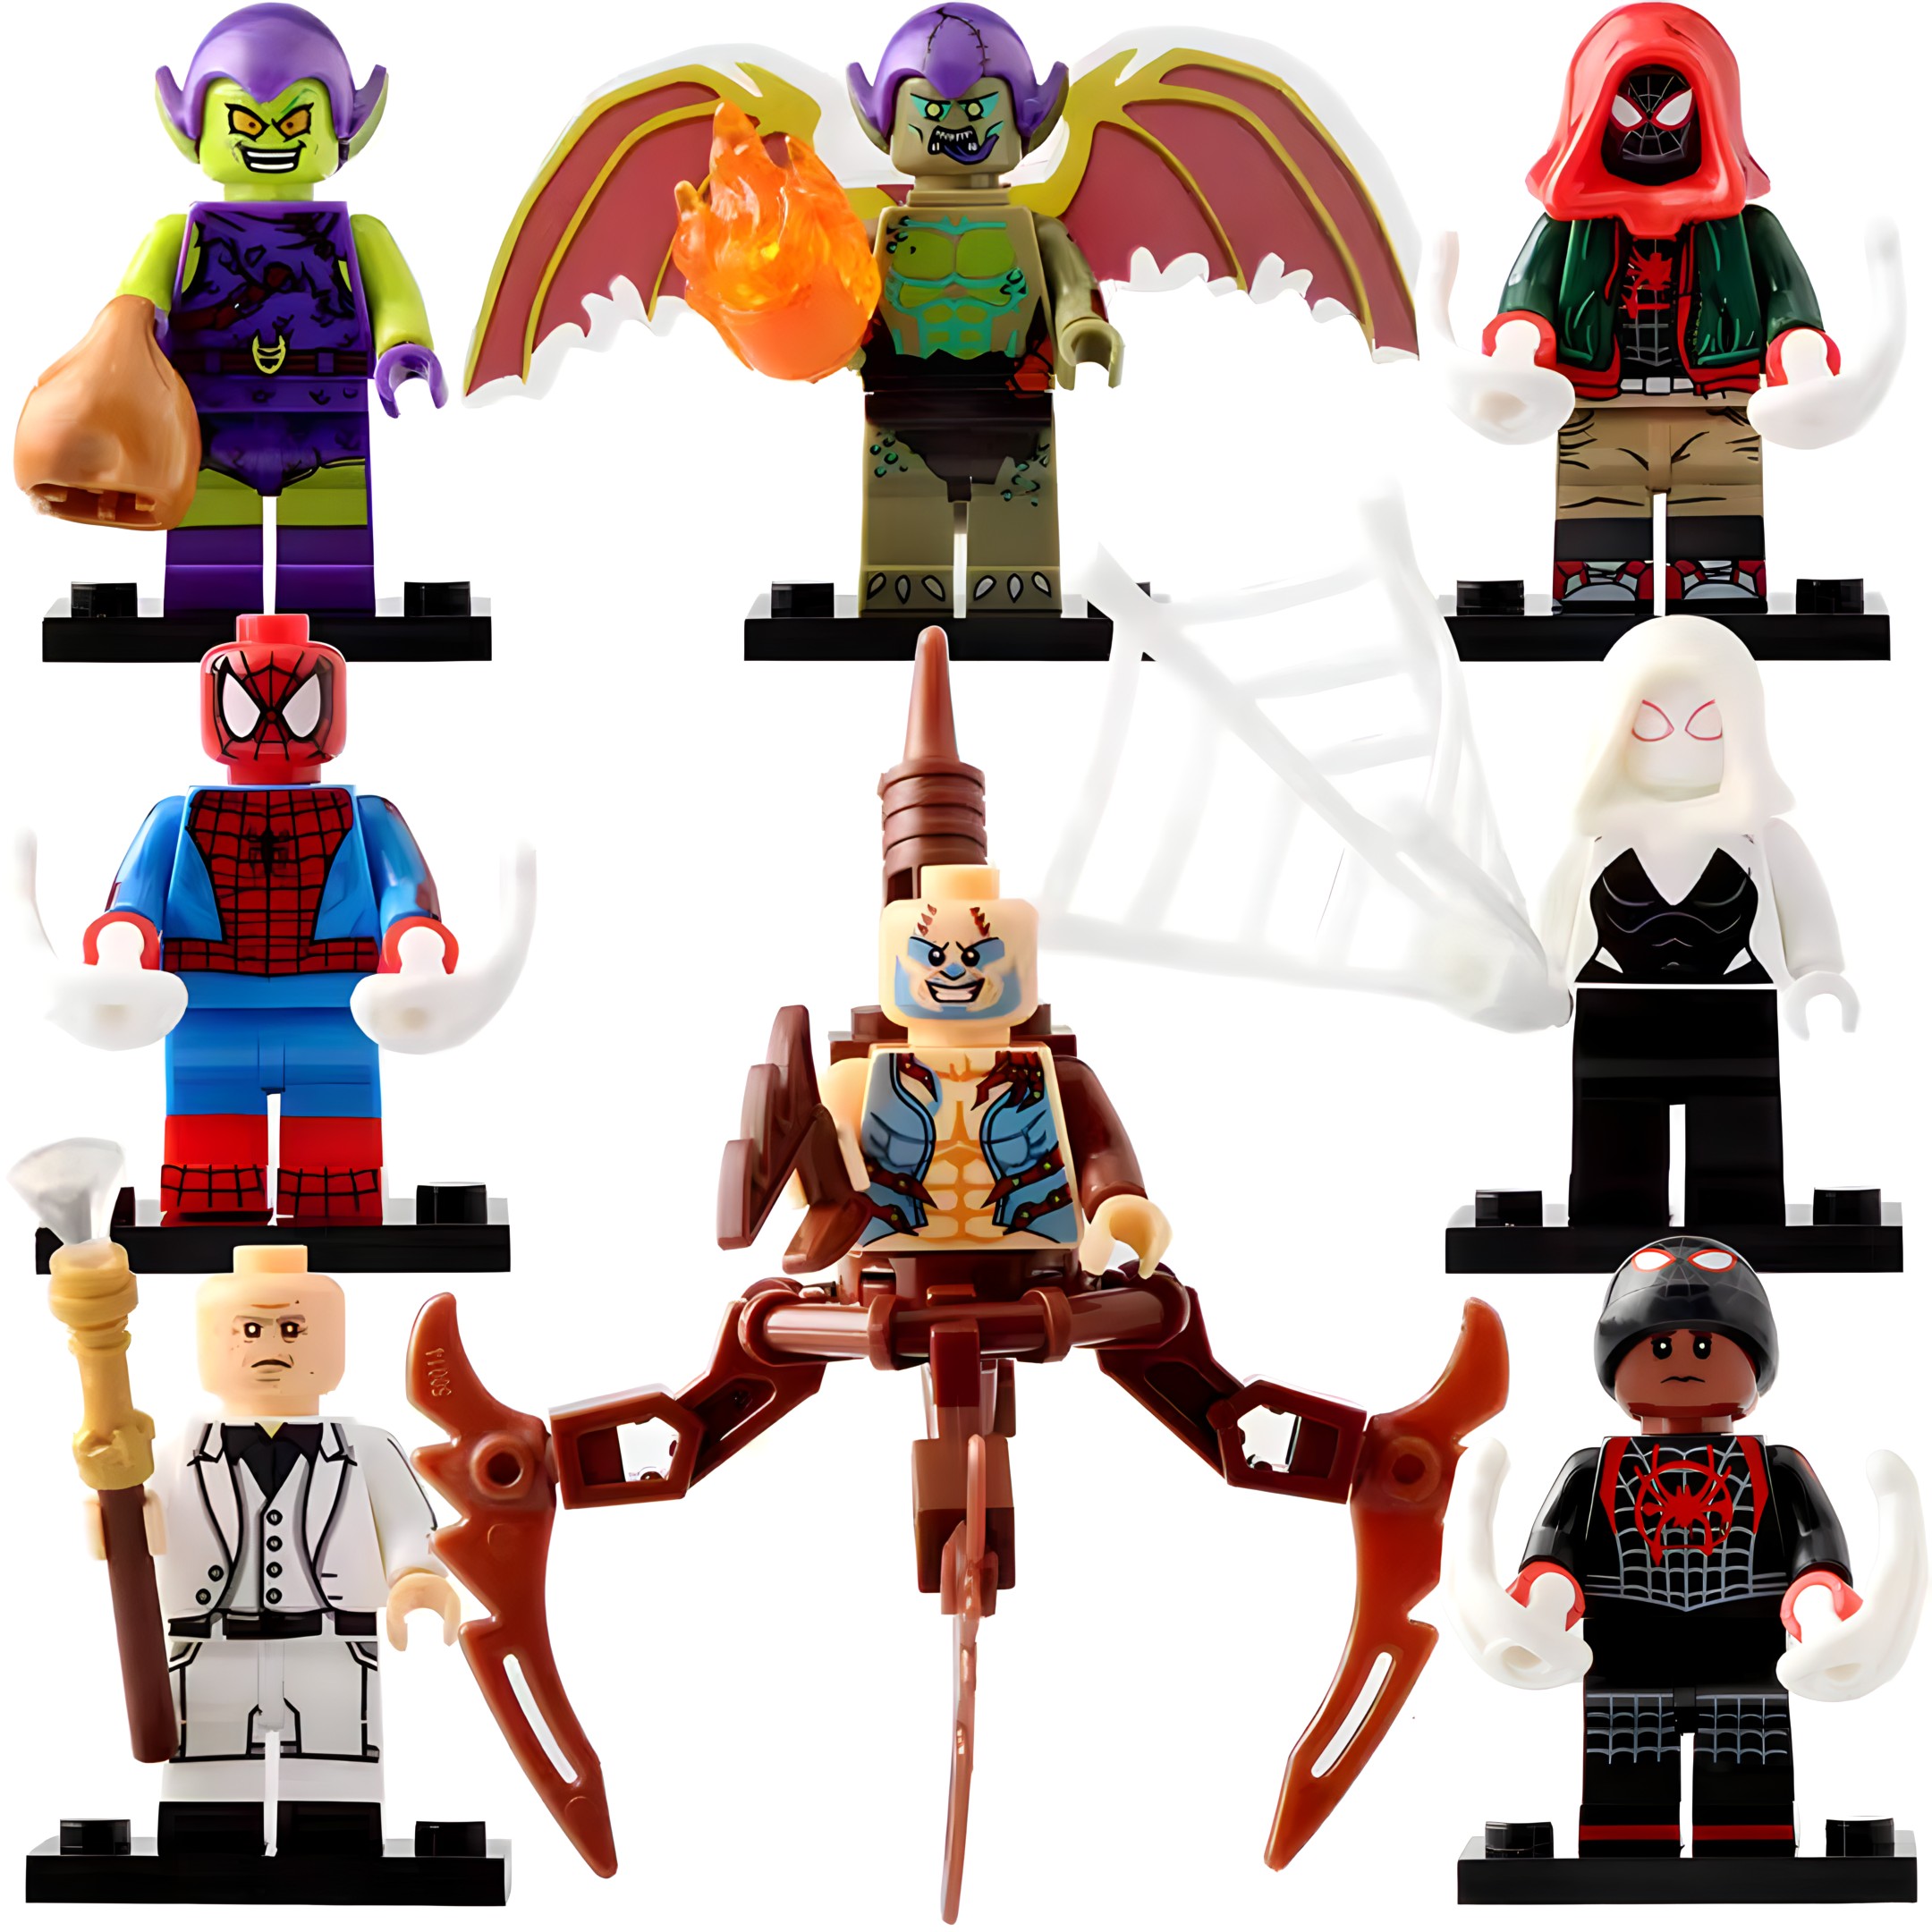 Improved Spider-Man No Way Home minifigures : r/lego